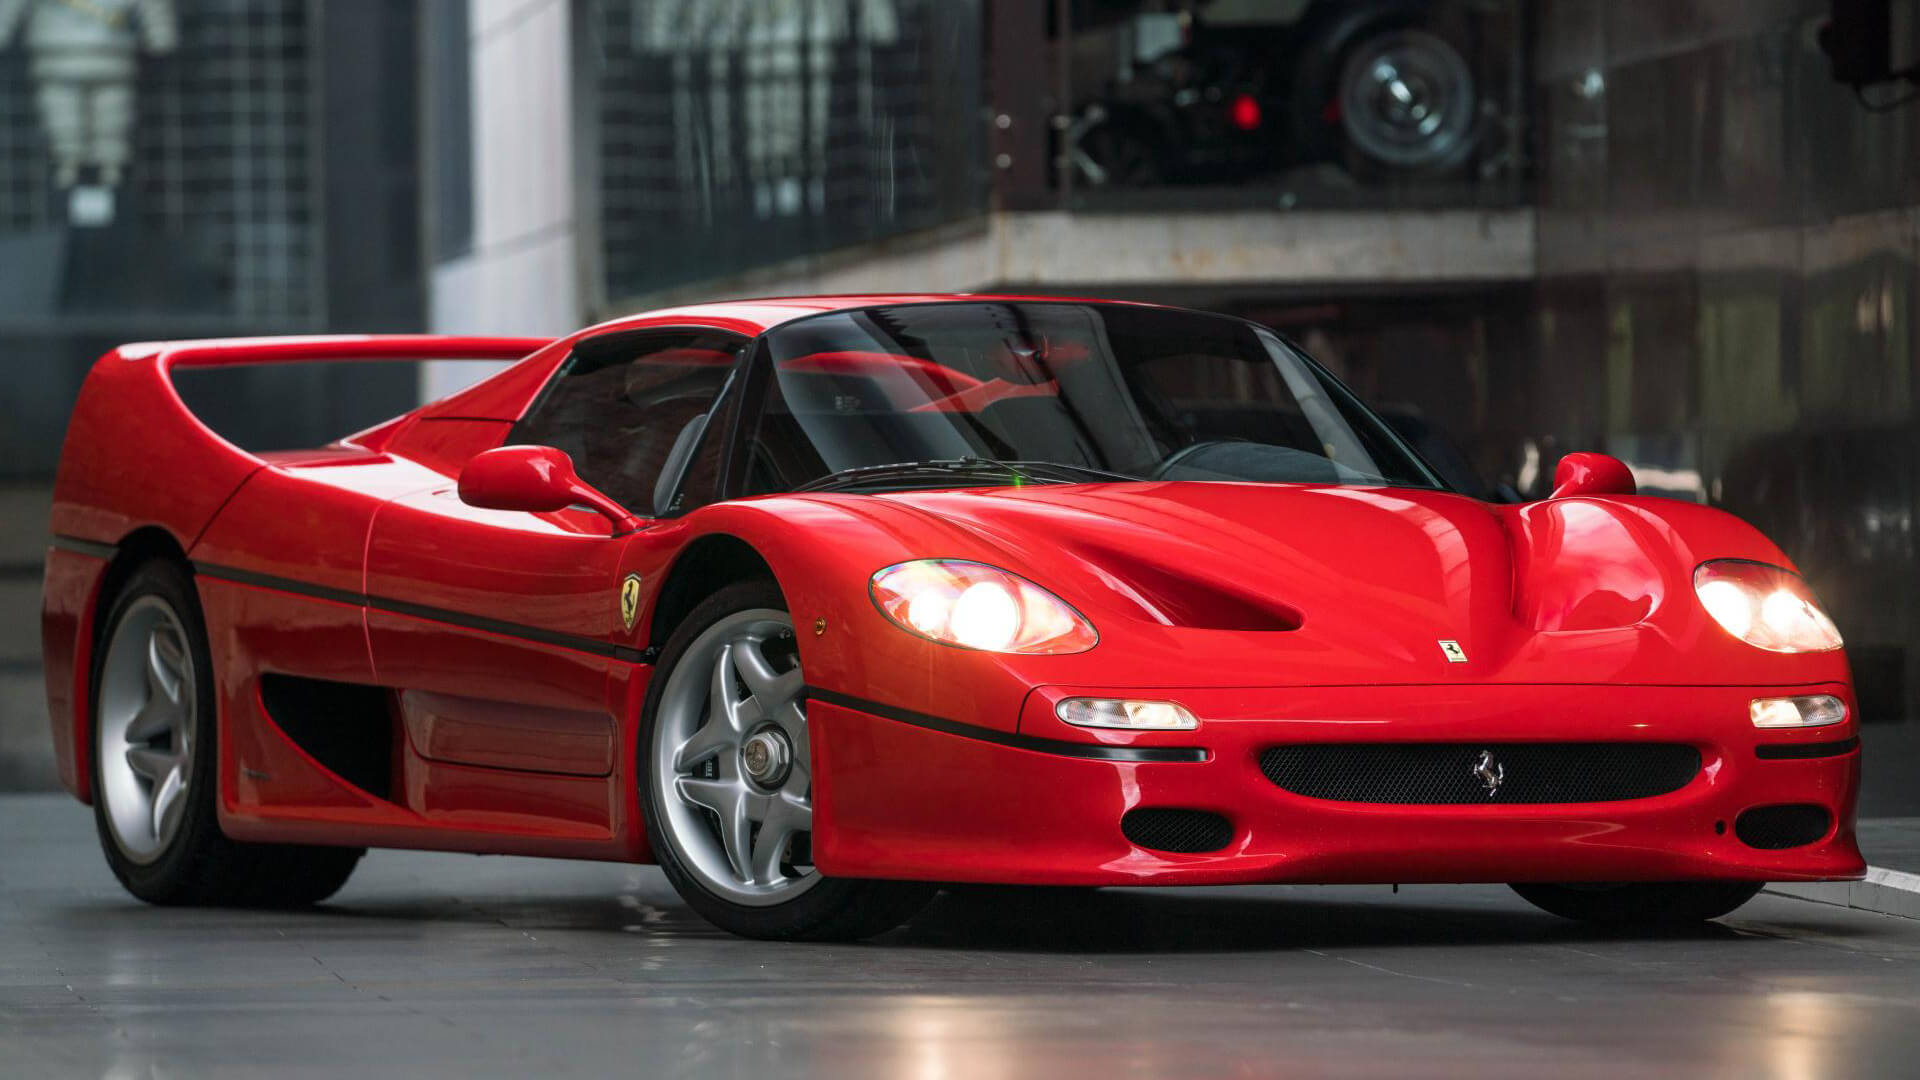 The Ferrari F50 Is A Prancing Horse Surrounded By Controversy And Unjust Ire